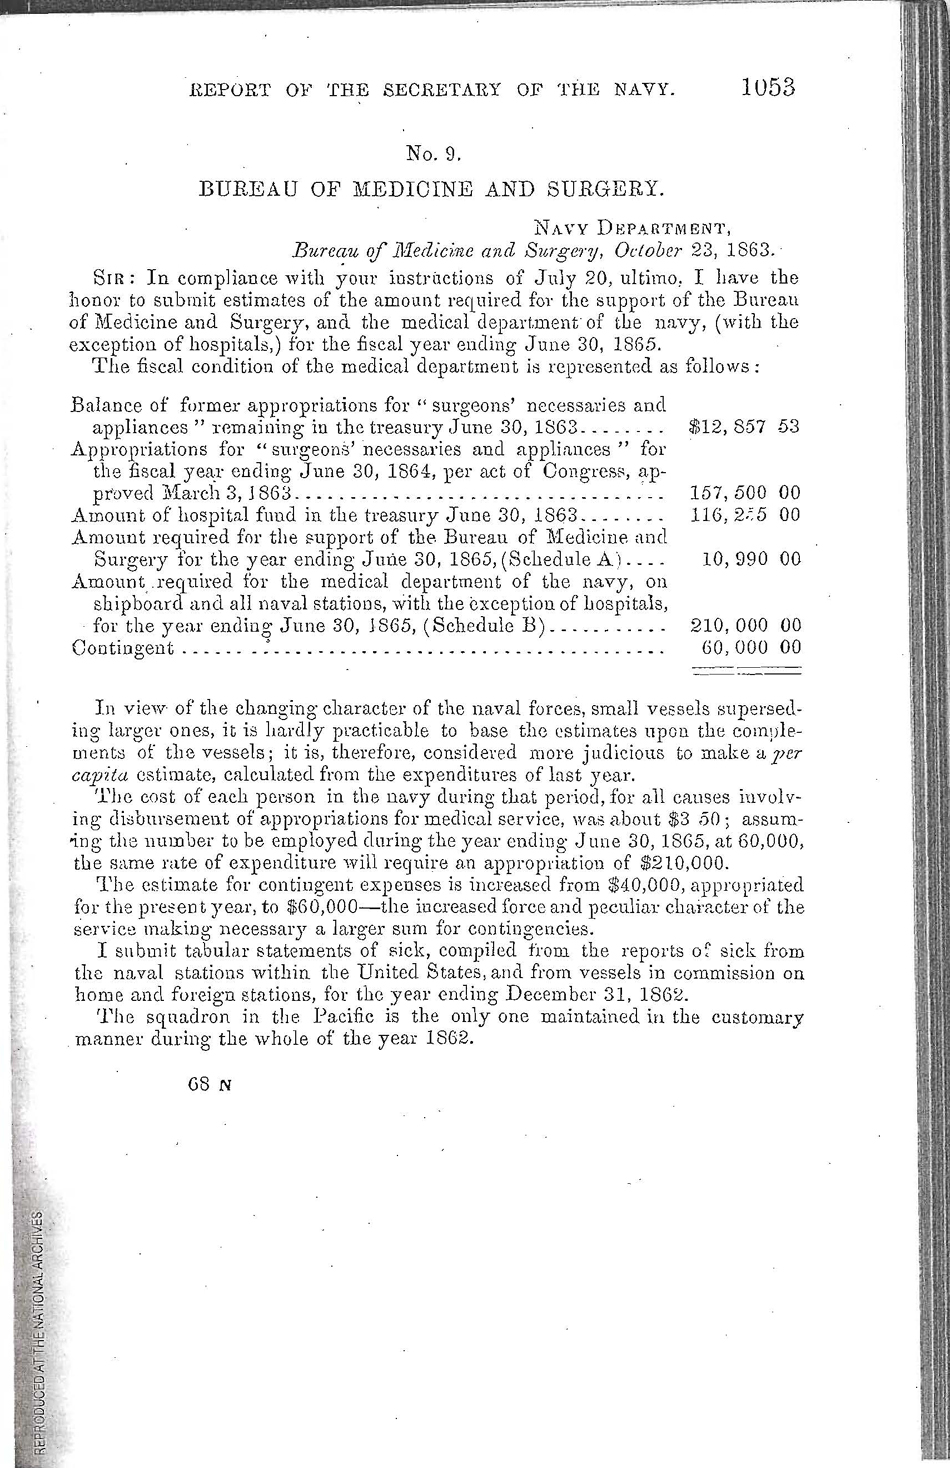 Annual Report of the Secretary of the Navy - 1863-64 - Page 1053